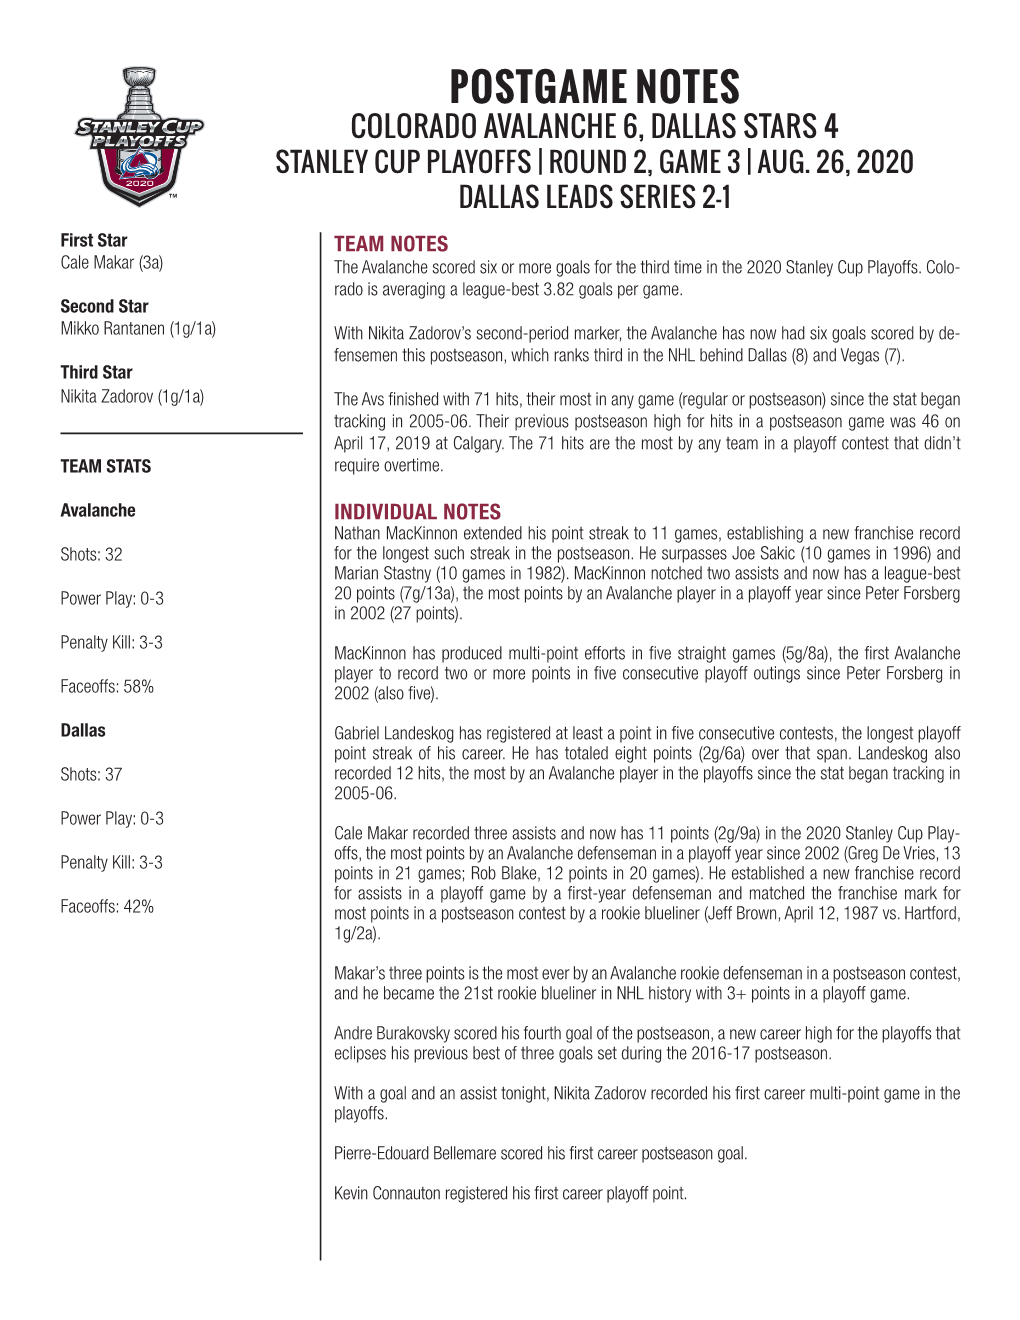 Postgame Notes Colorado Avalanche 6, Dallas Stars 4 Stanley Cup Playoffs | Round 2, Game 3 | Aug